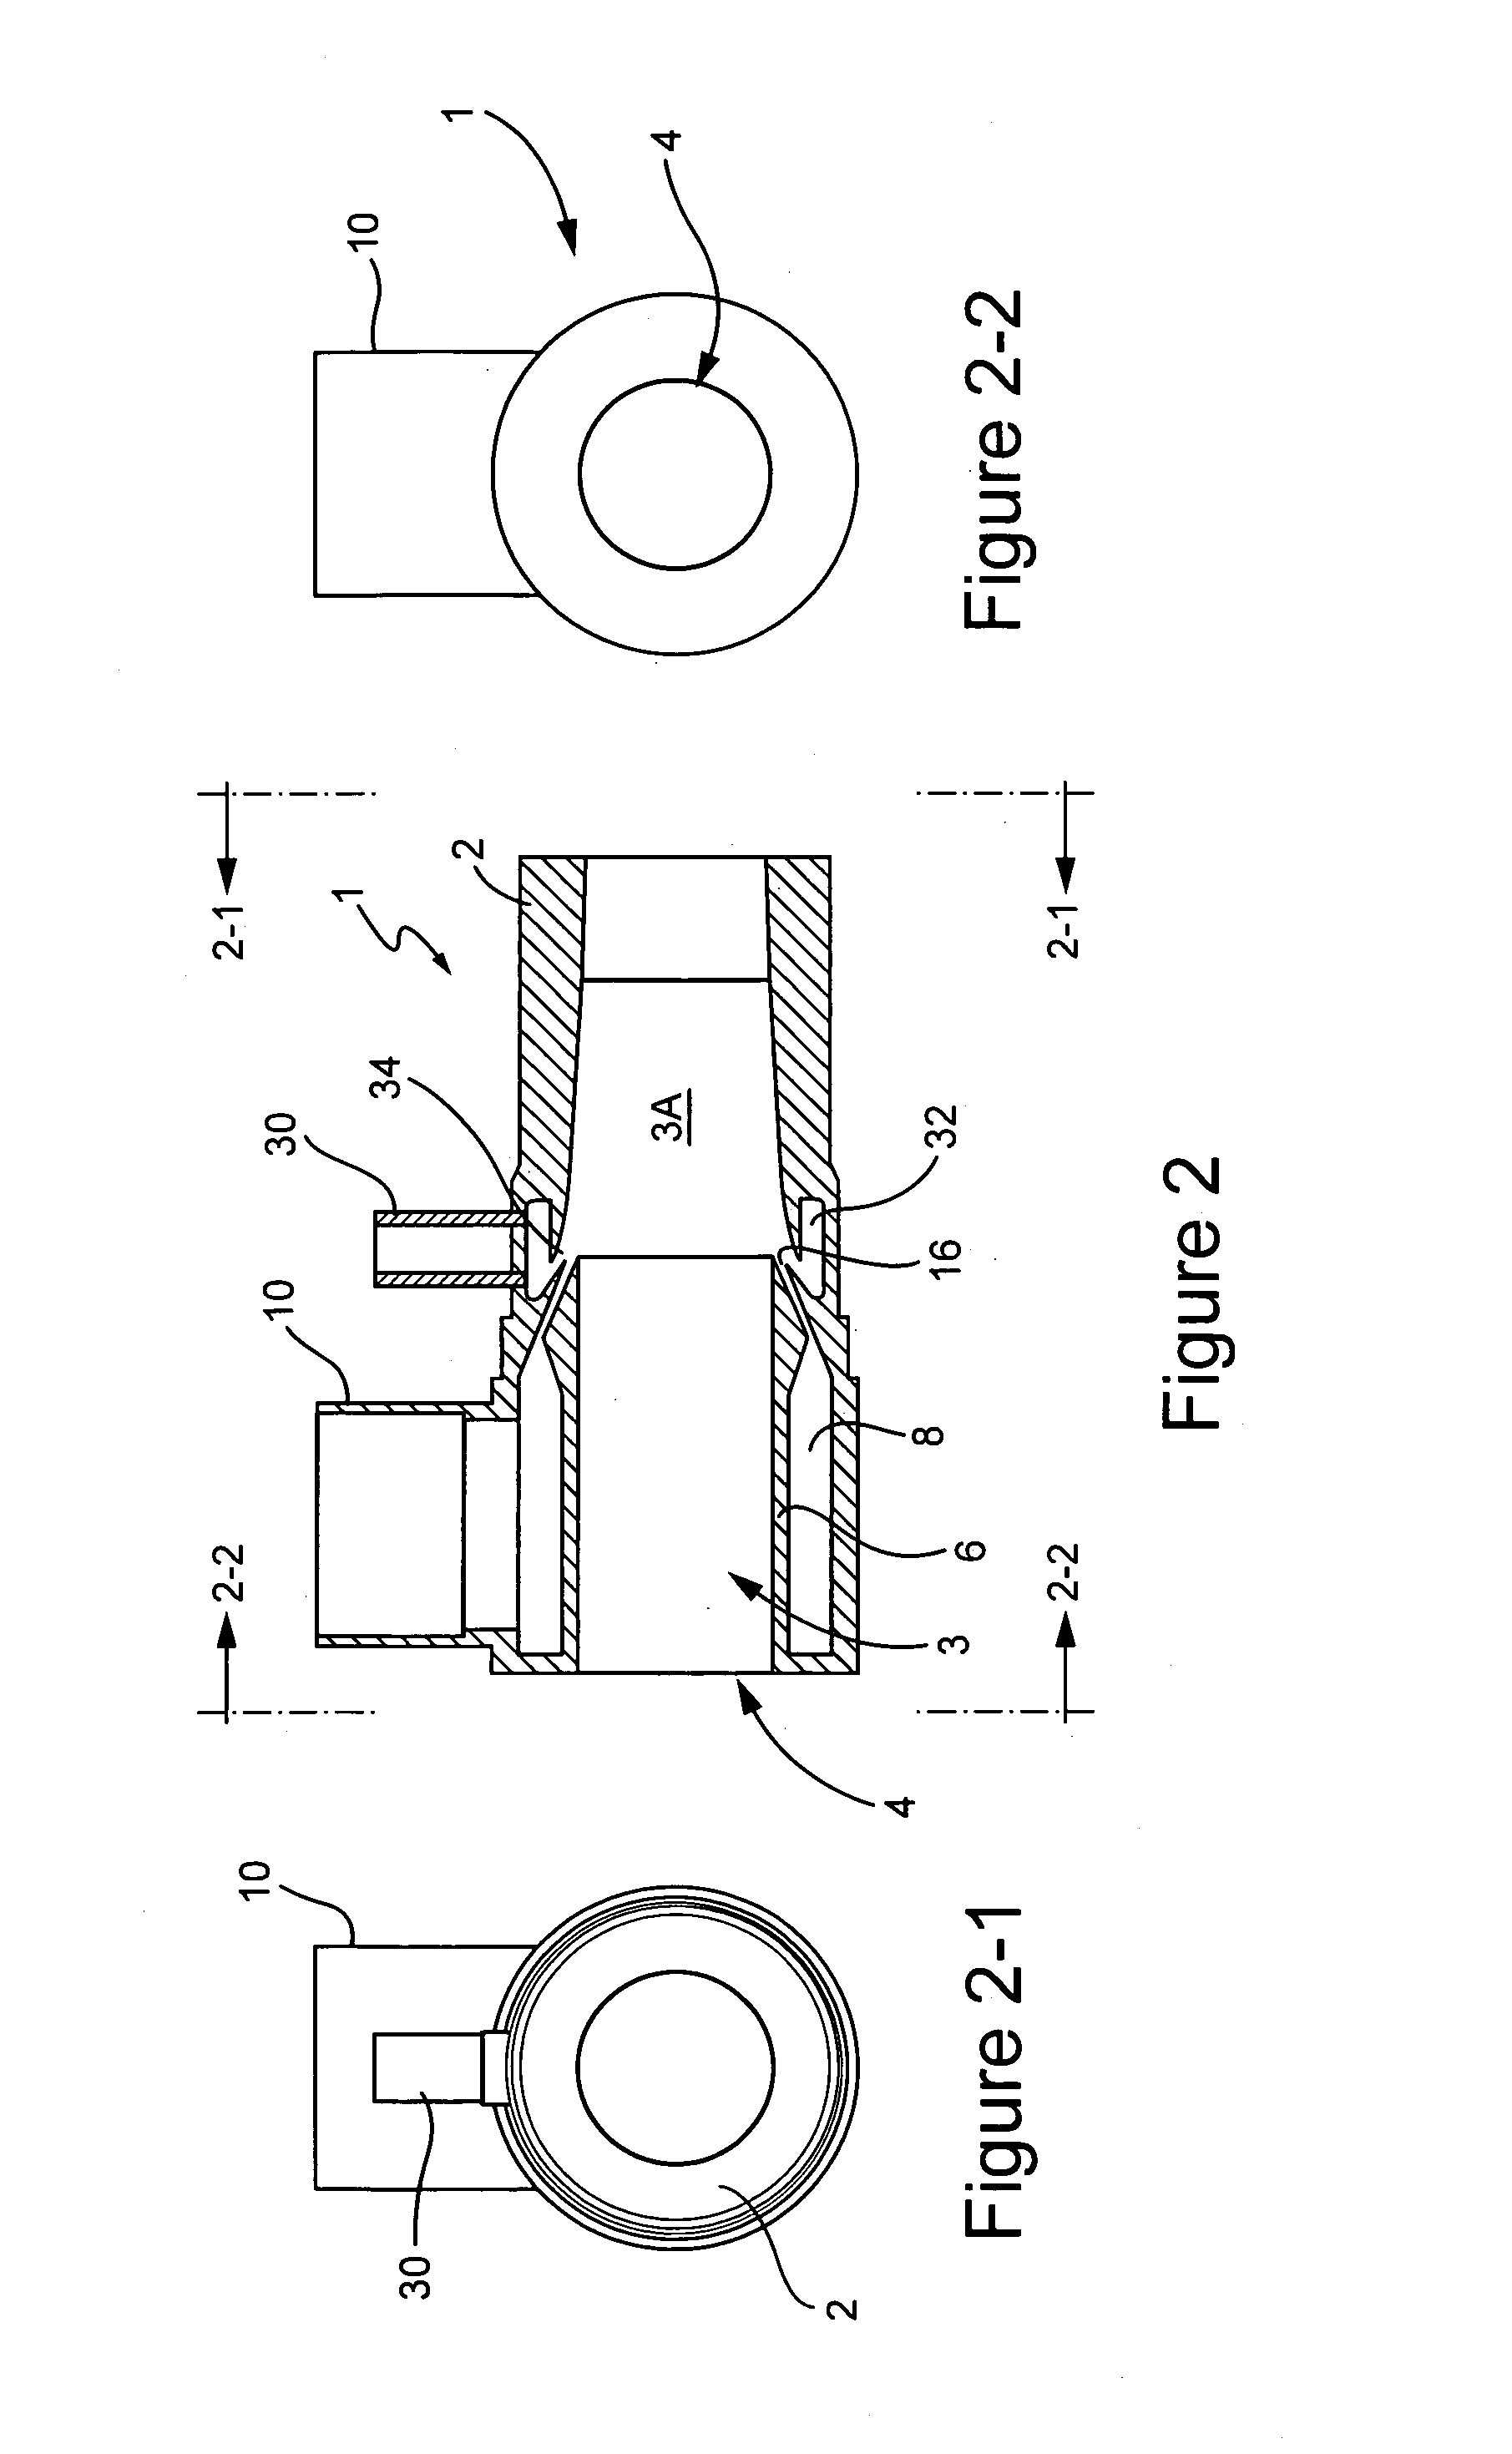 Apparatus and methods for moving a working fluid by contact with a transport fluid